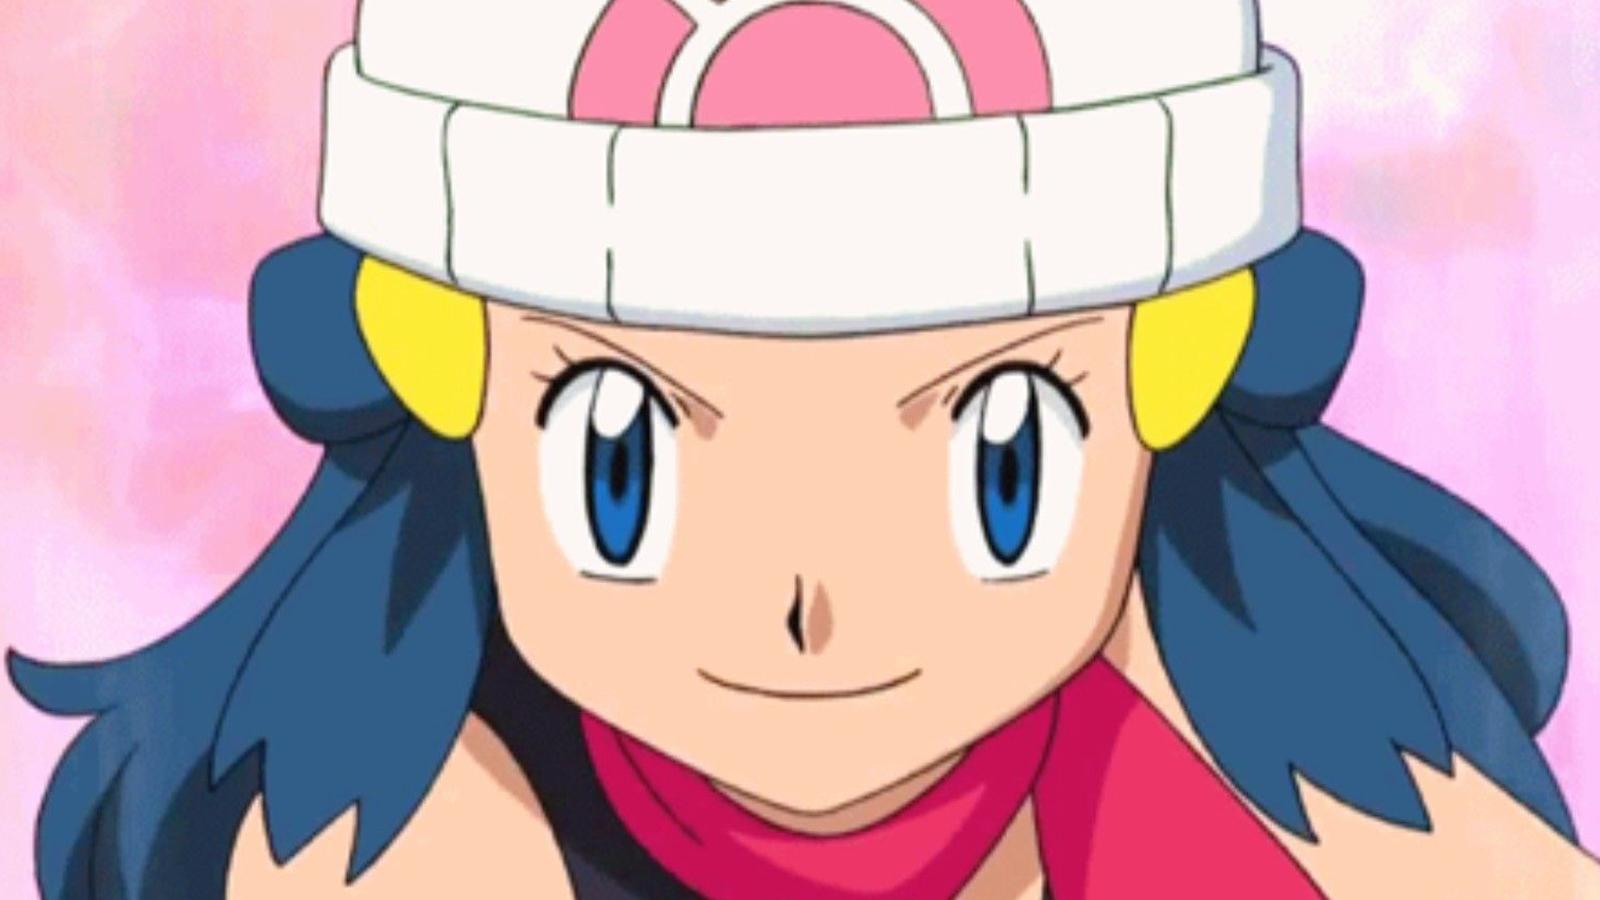 Dawn from Sinnoh ready for Pokemon Diamond & Pearl remakes.